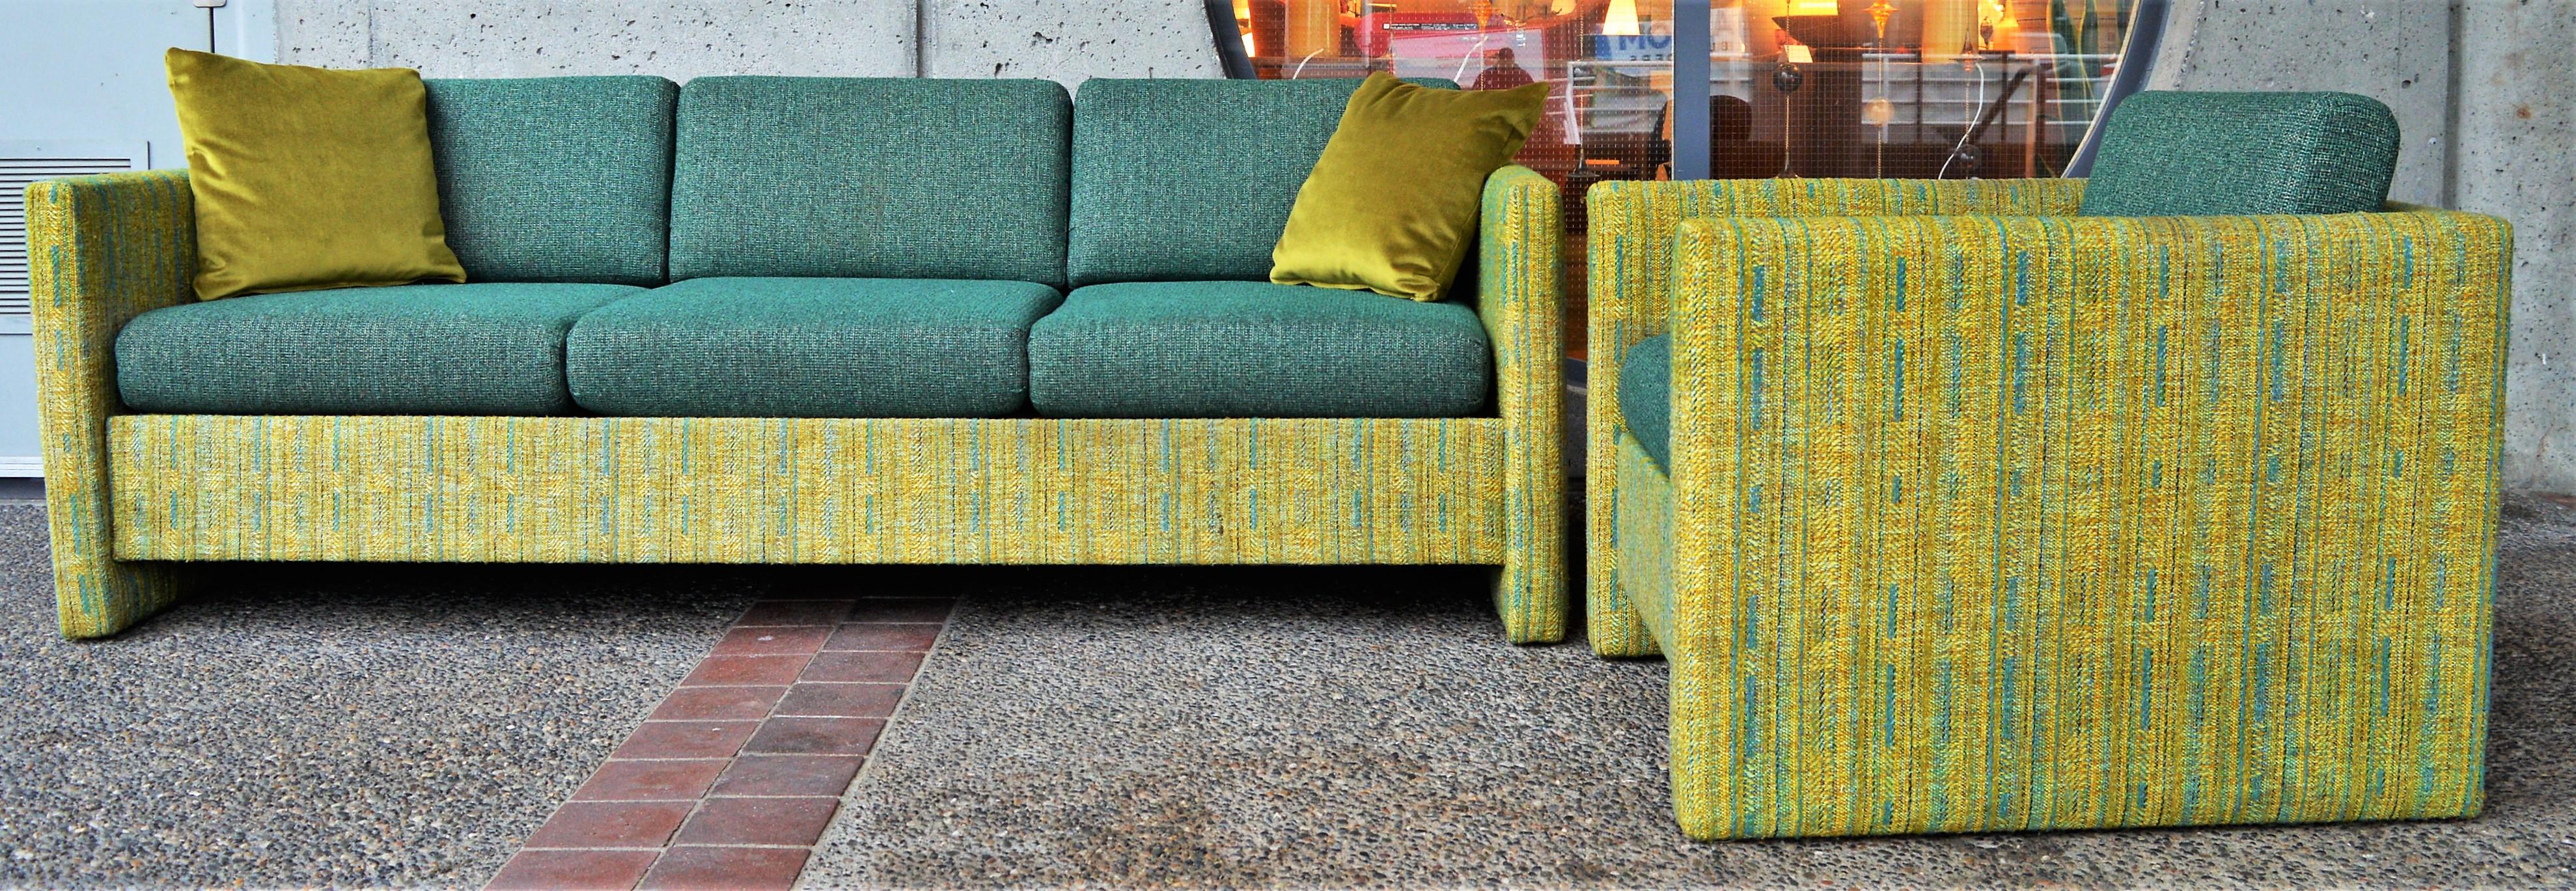 Midcentury Sofa and Club Chair in Teal Wool Cushions with Contrasting Print im Zustand „Gut“ in New Westminster, British Columbia